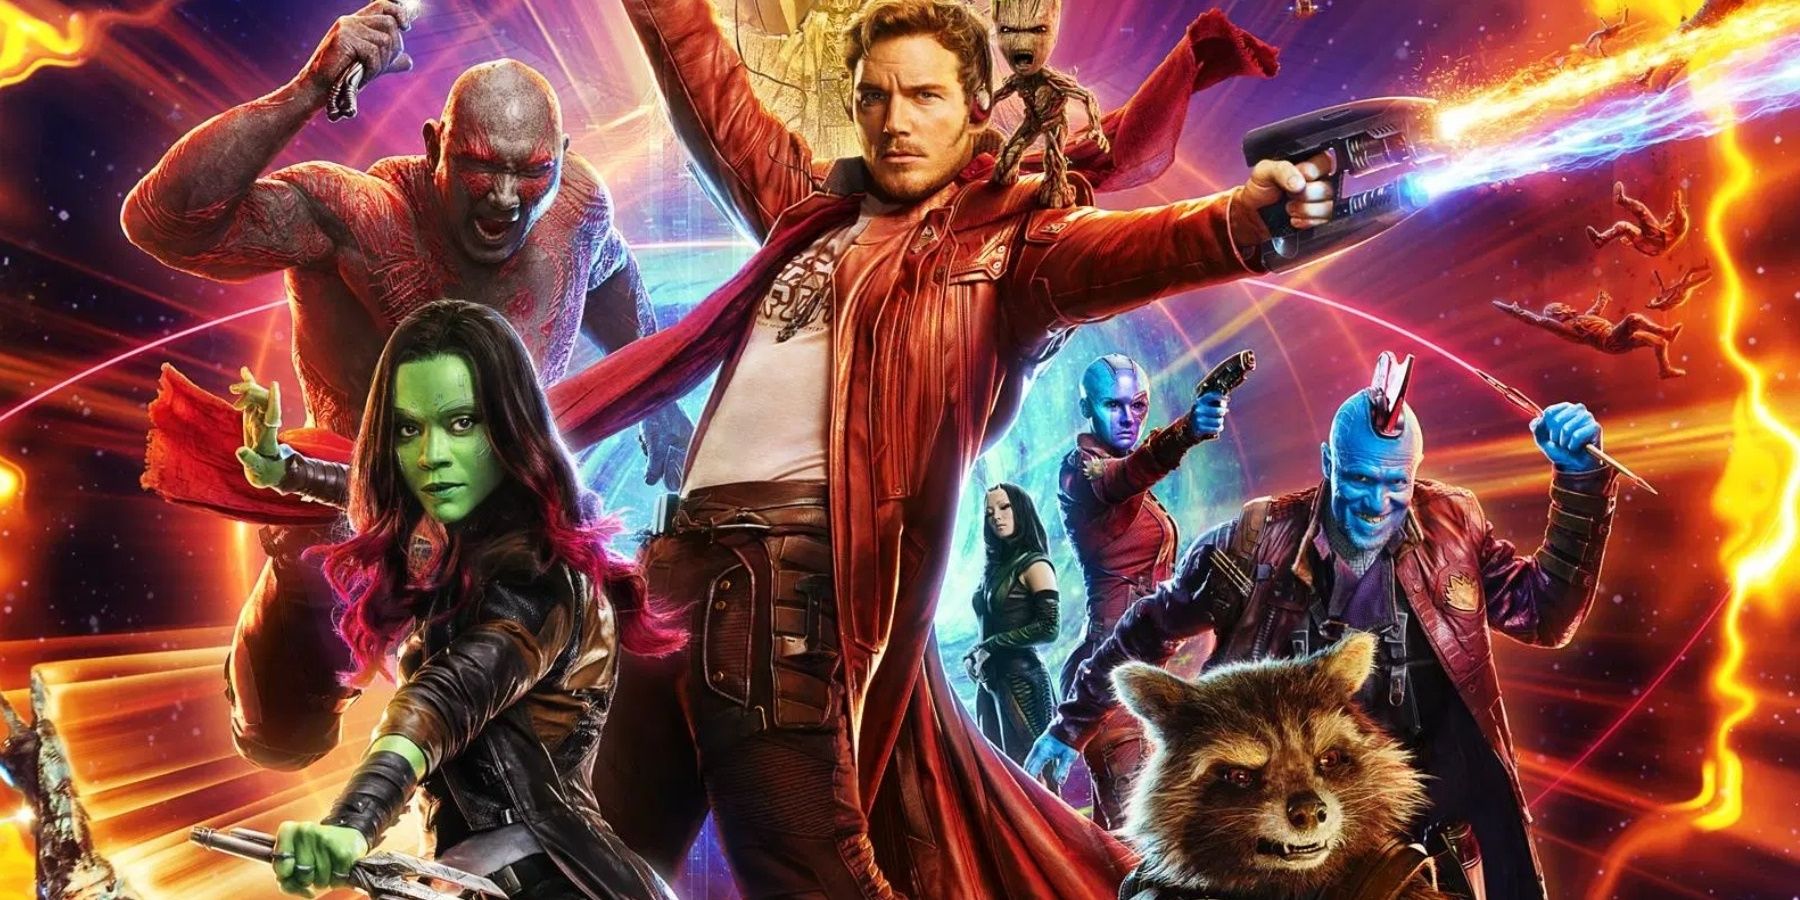 The Guardians of the Galaxy Vol. 2 poster depicts Star-Lord leading the Guardians and Ravagers